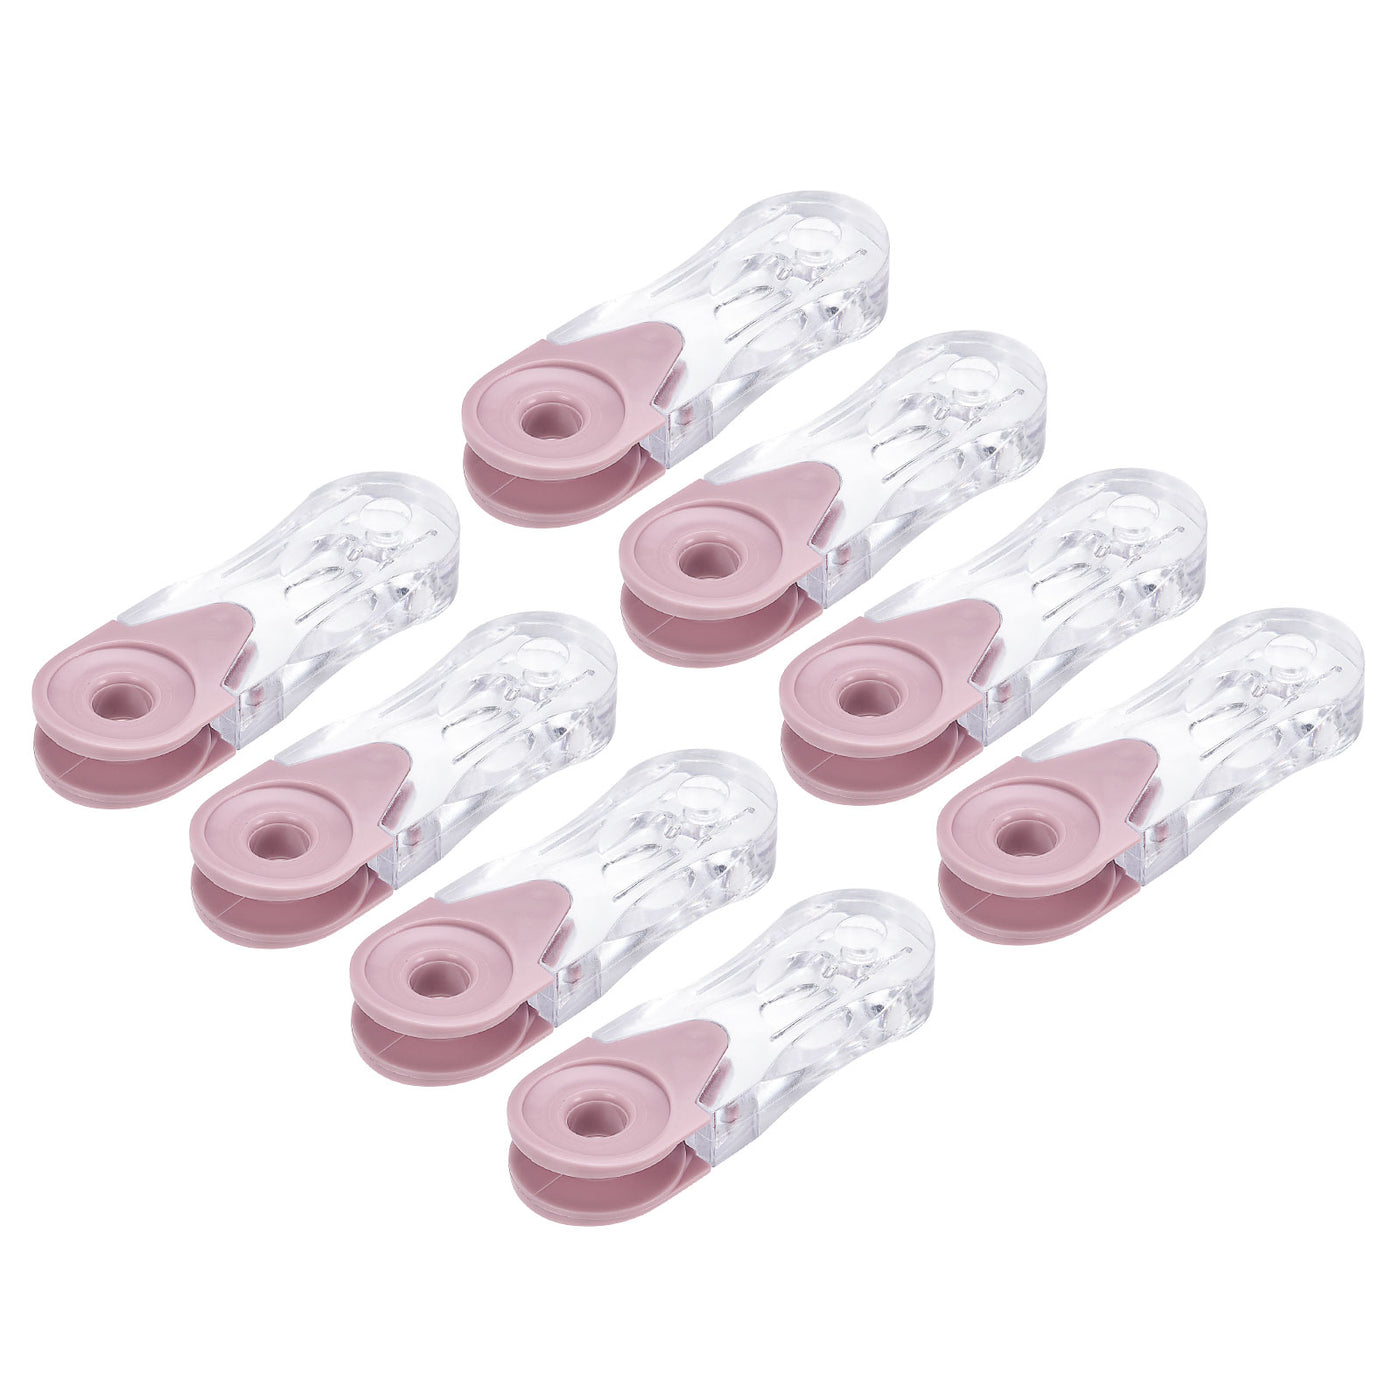 uxcell Uxcell Blinds Chain Handles, 8Pcs 90mm Roller Shade Cord Weights for Window Parts, Pink